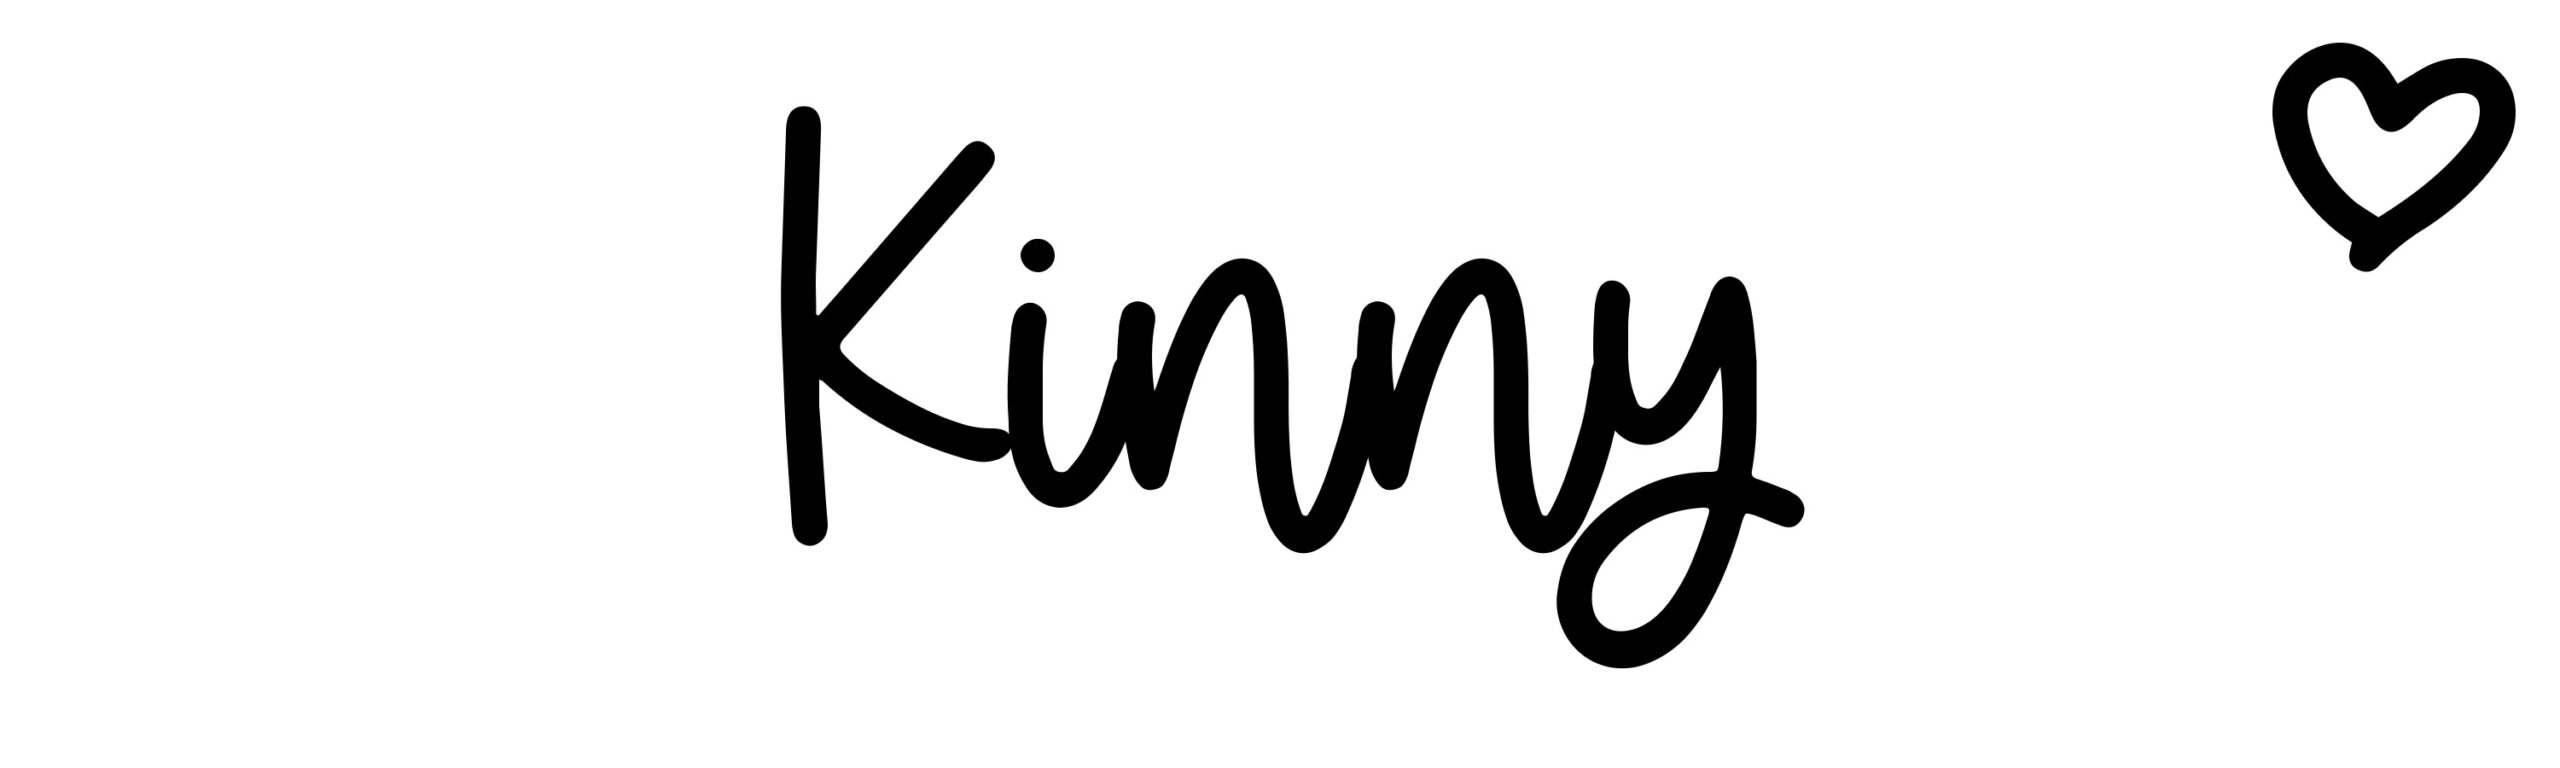 Kinny - Name meaning, origin, variations and more